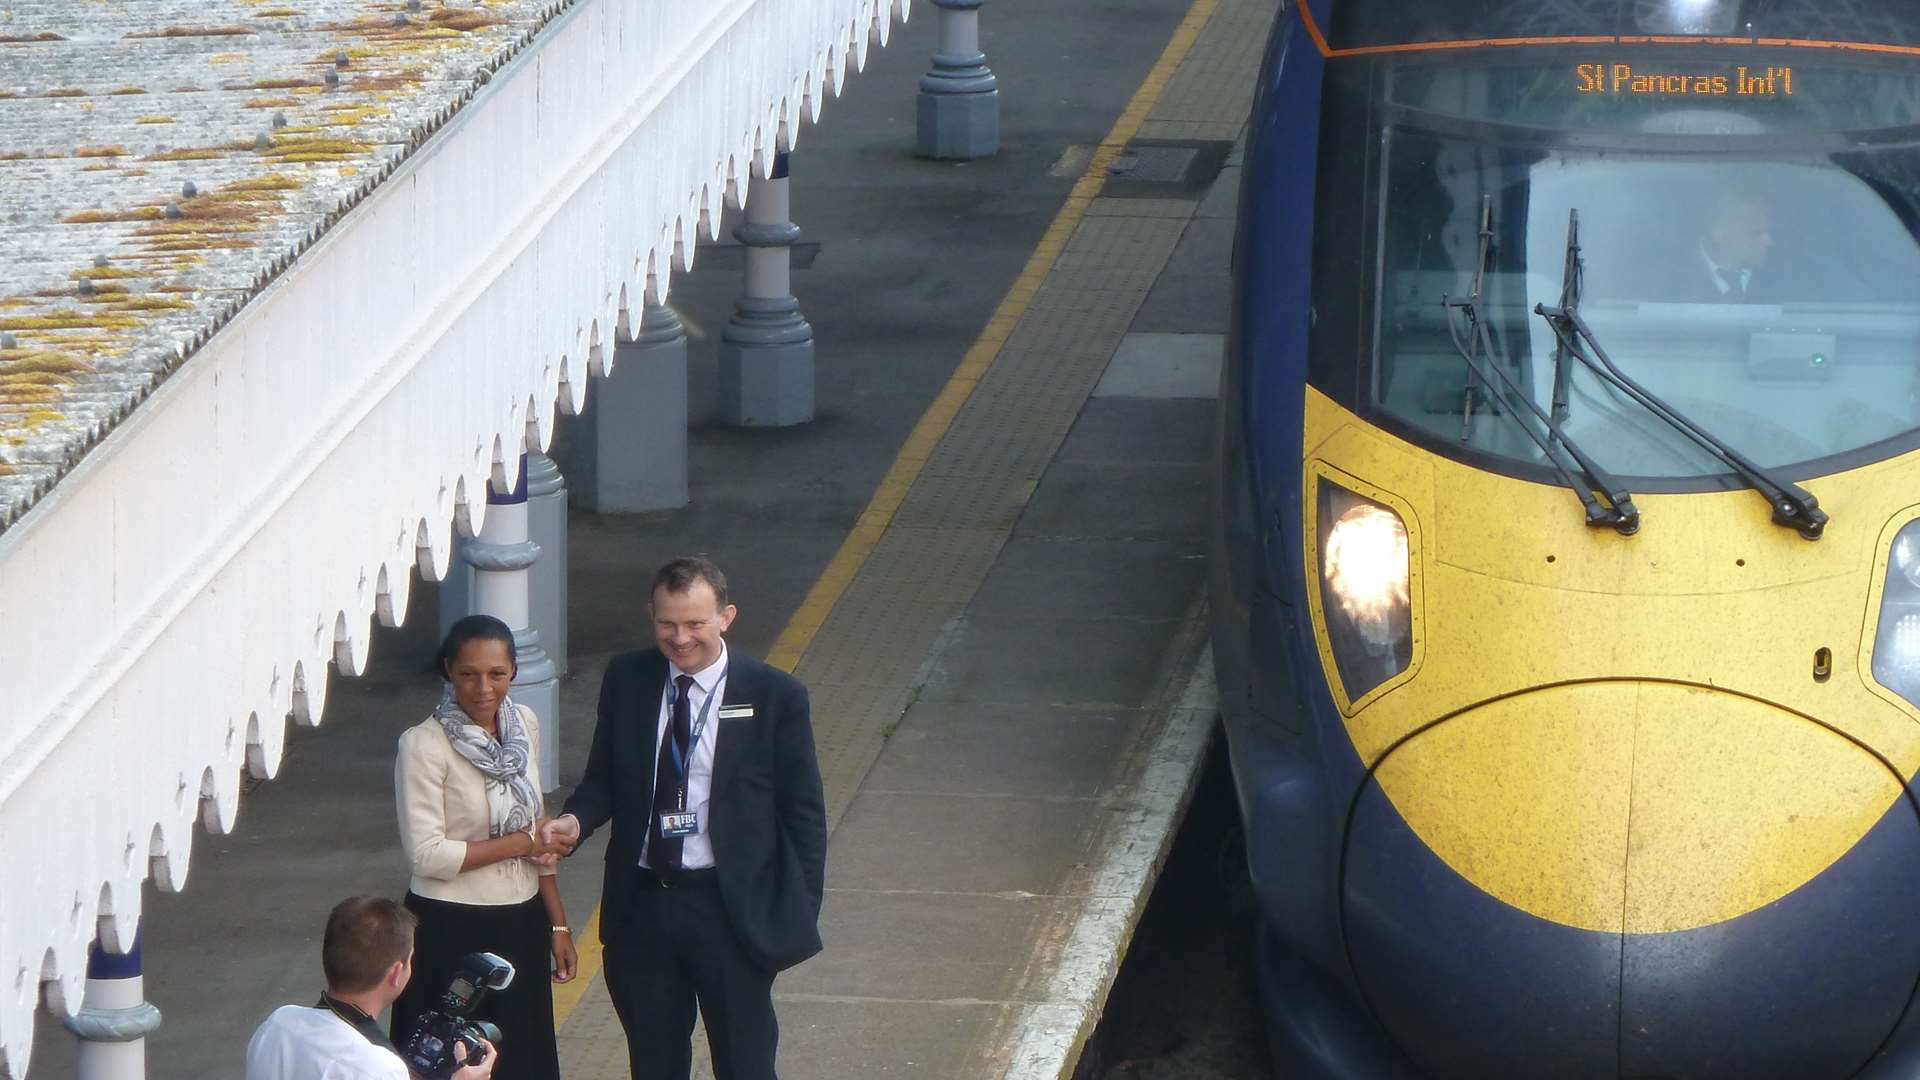 Helen Grant at the launch of Maidstone's high-speed service in 2011.